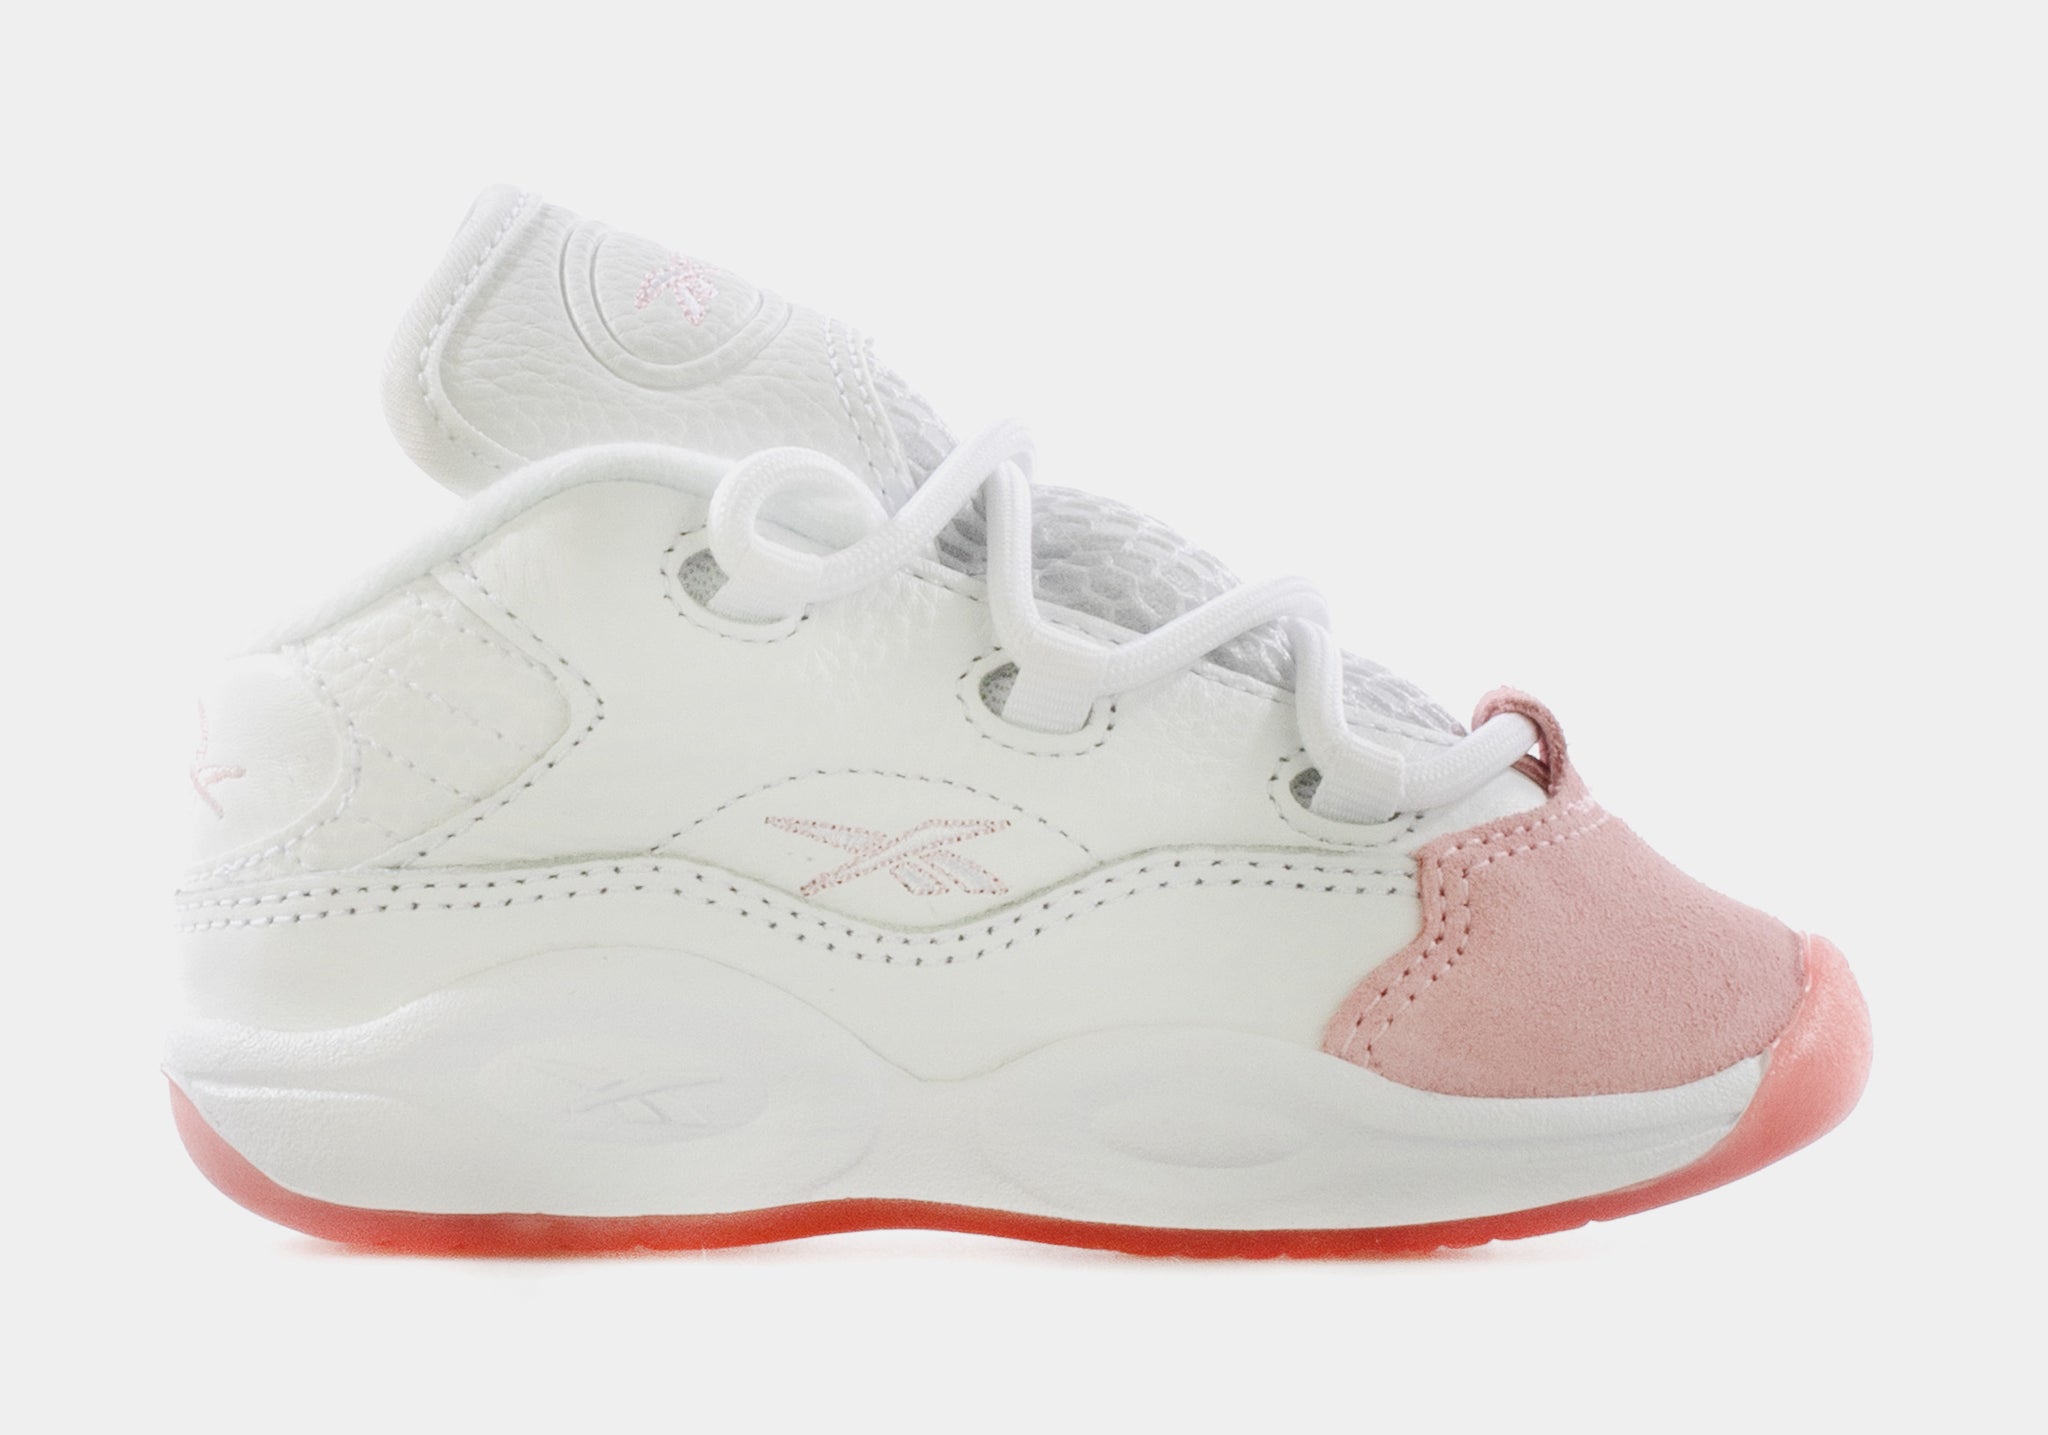 Reebok Question Mid Pink Toe Infant Toddler Lifestyle Shoe White Pink – Shoe Palace